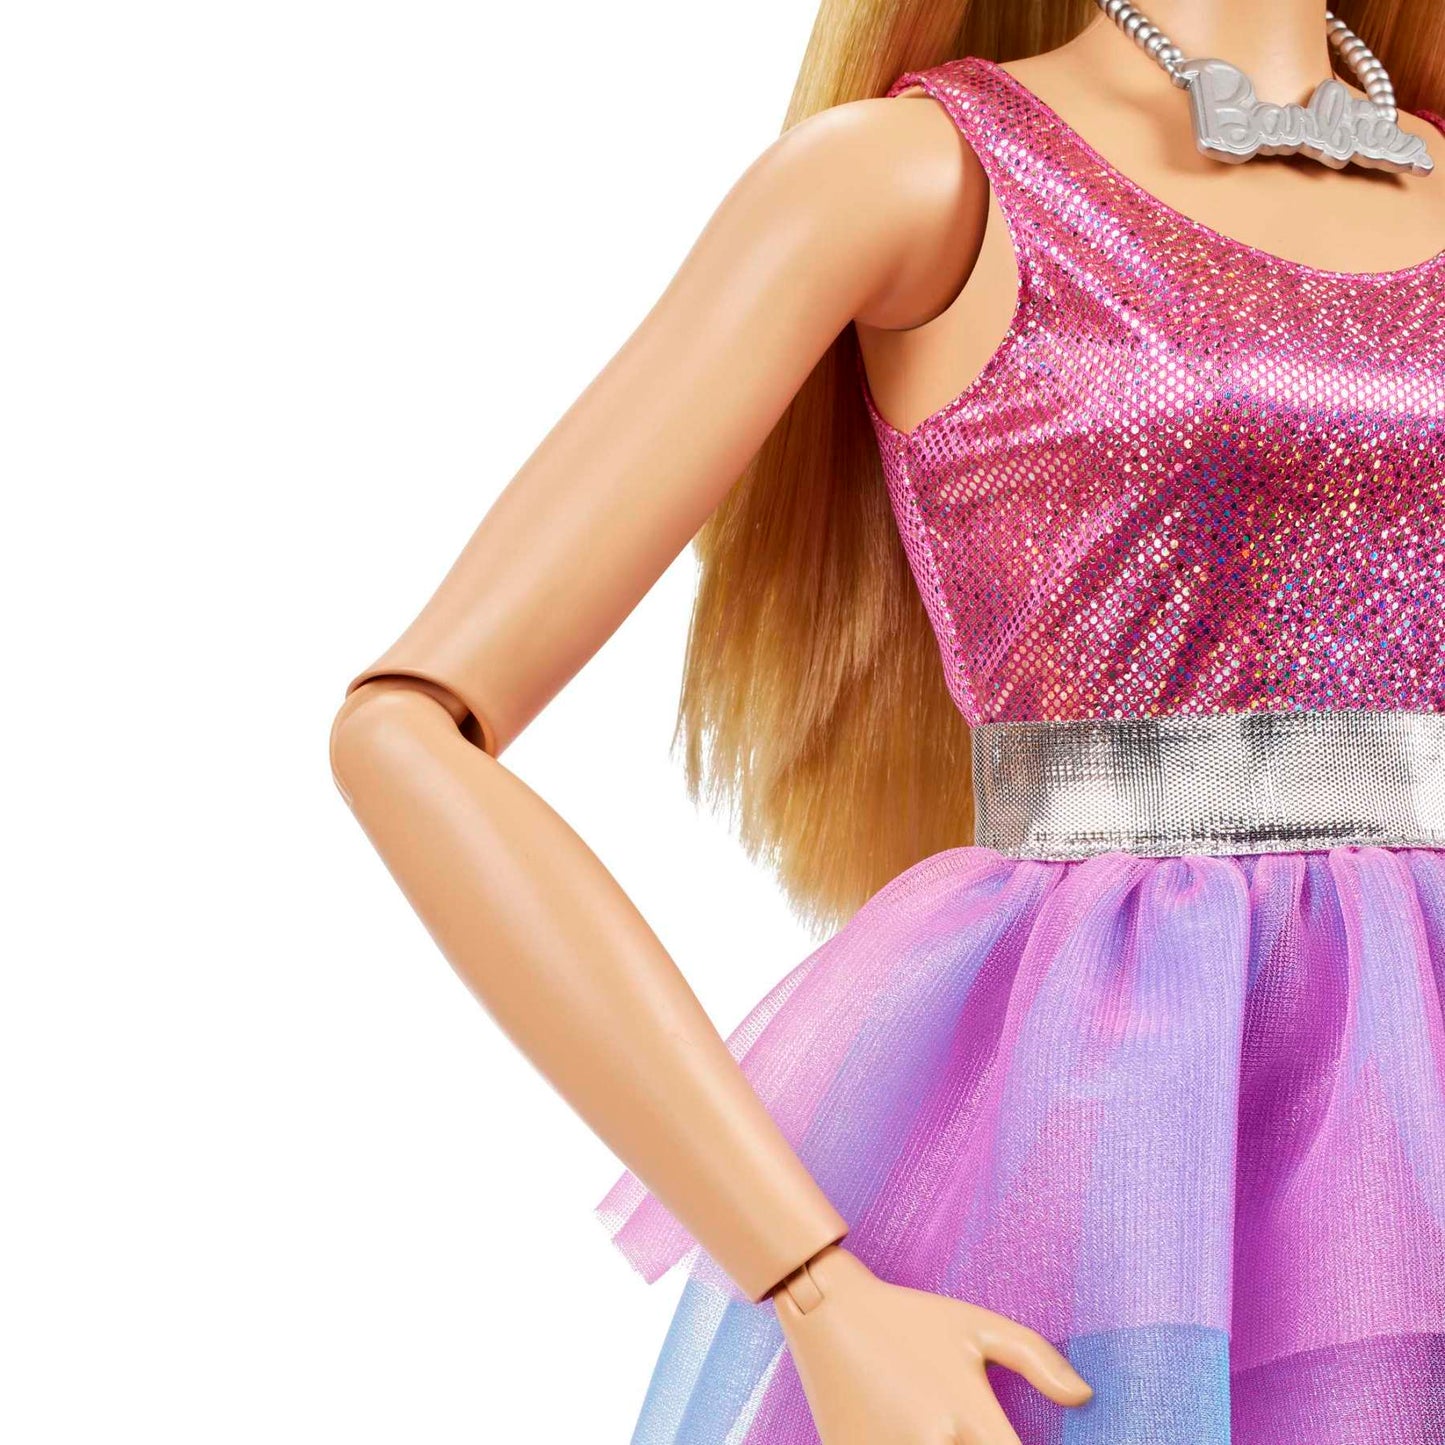 Barbie - Large Barbie Doll, 28 Inches Tall